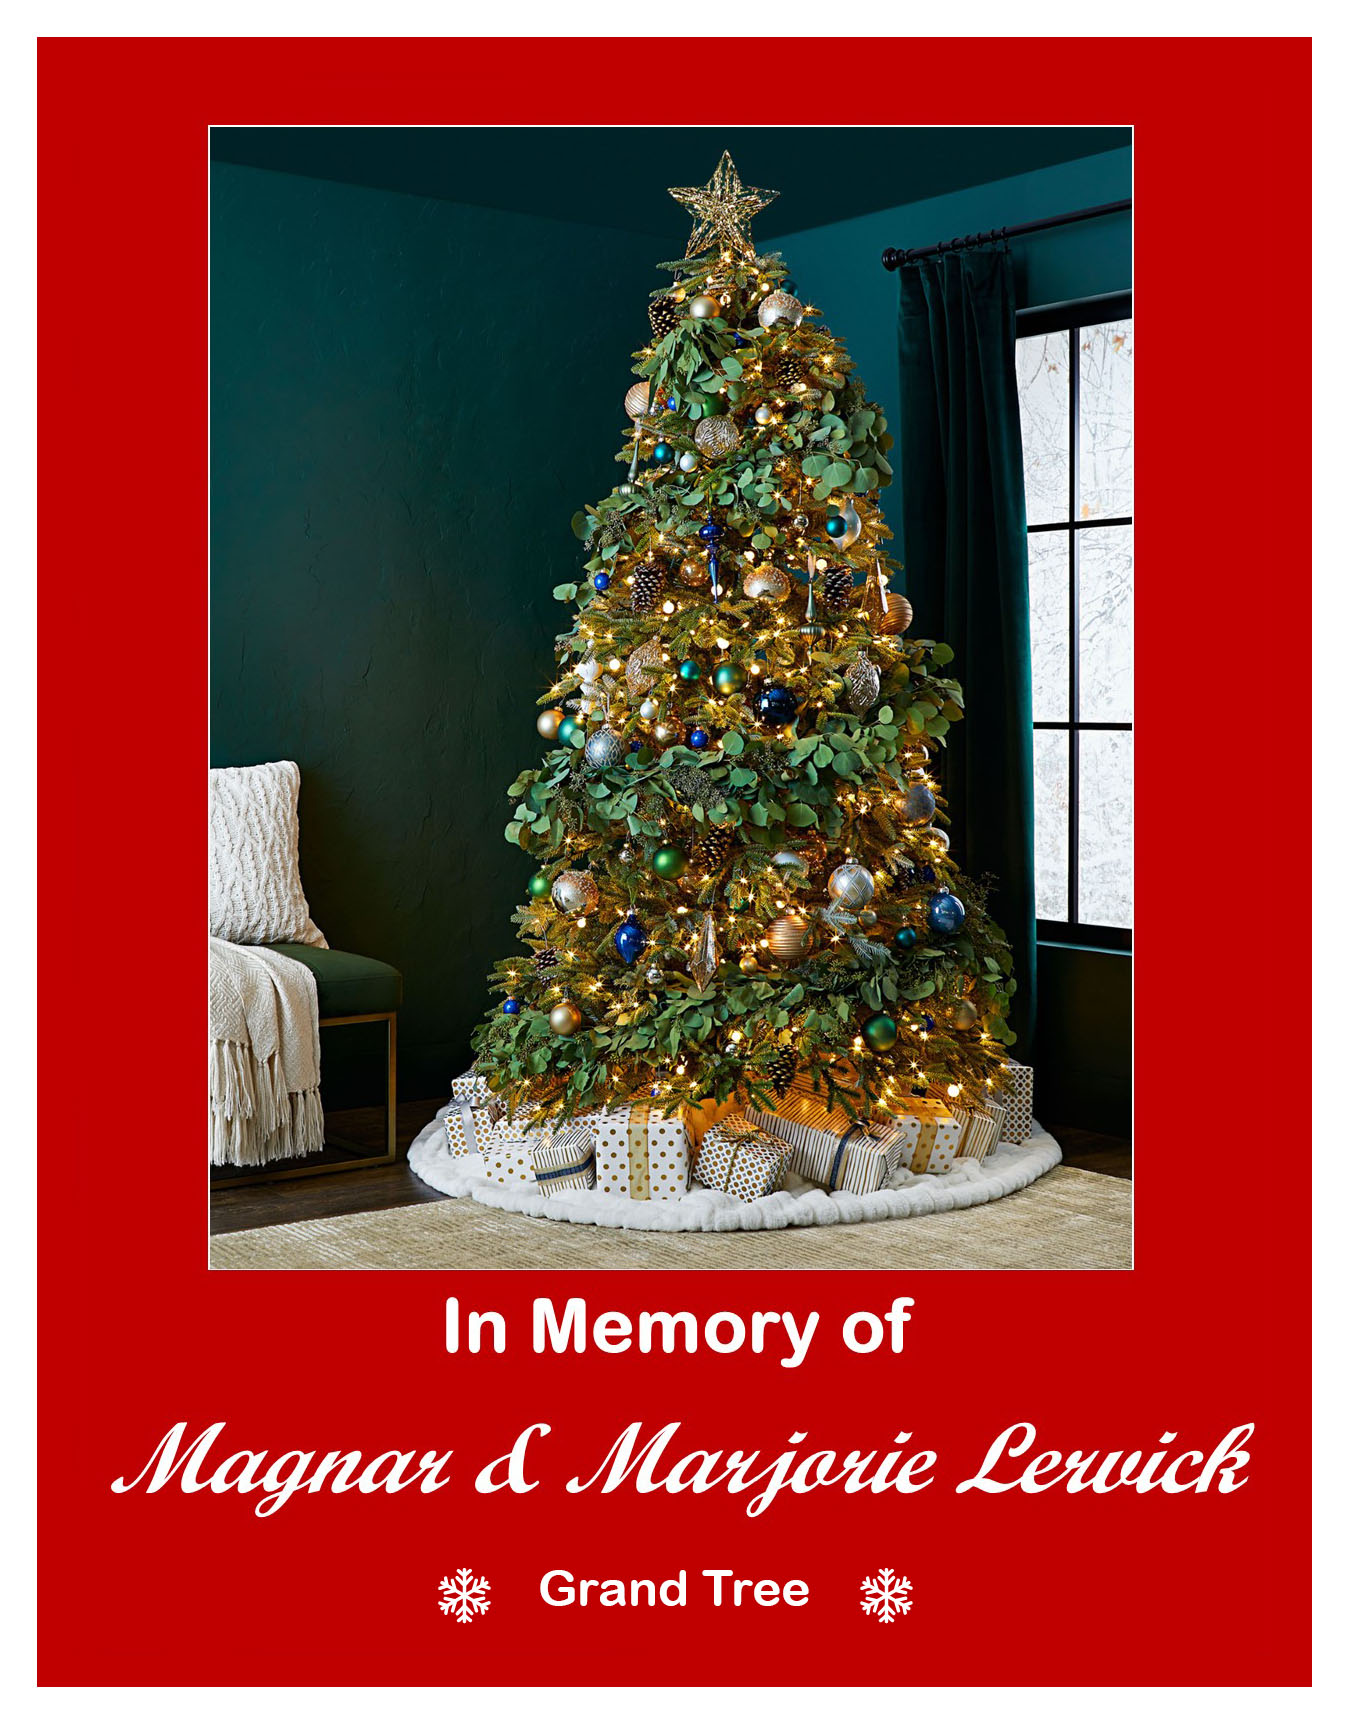 In Memory of Magnar and Marjorie Lervick